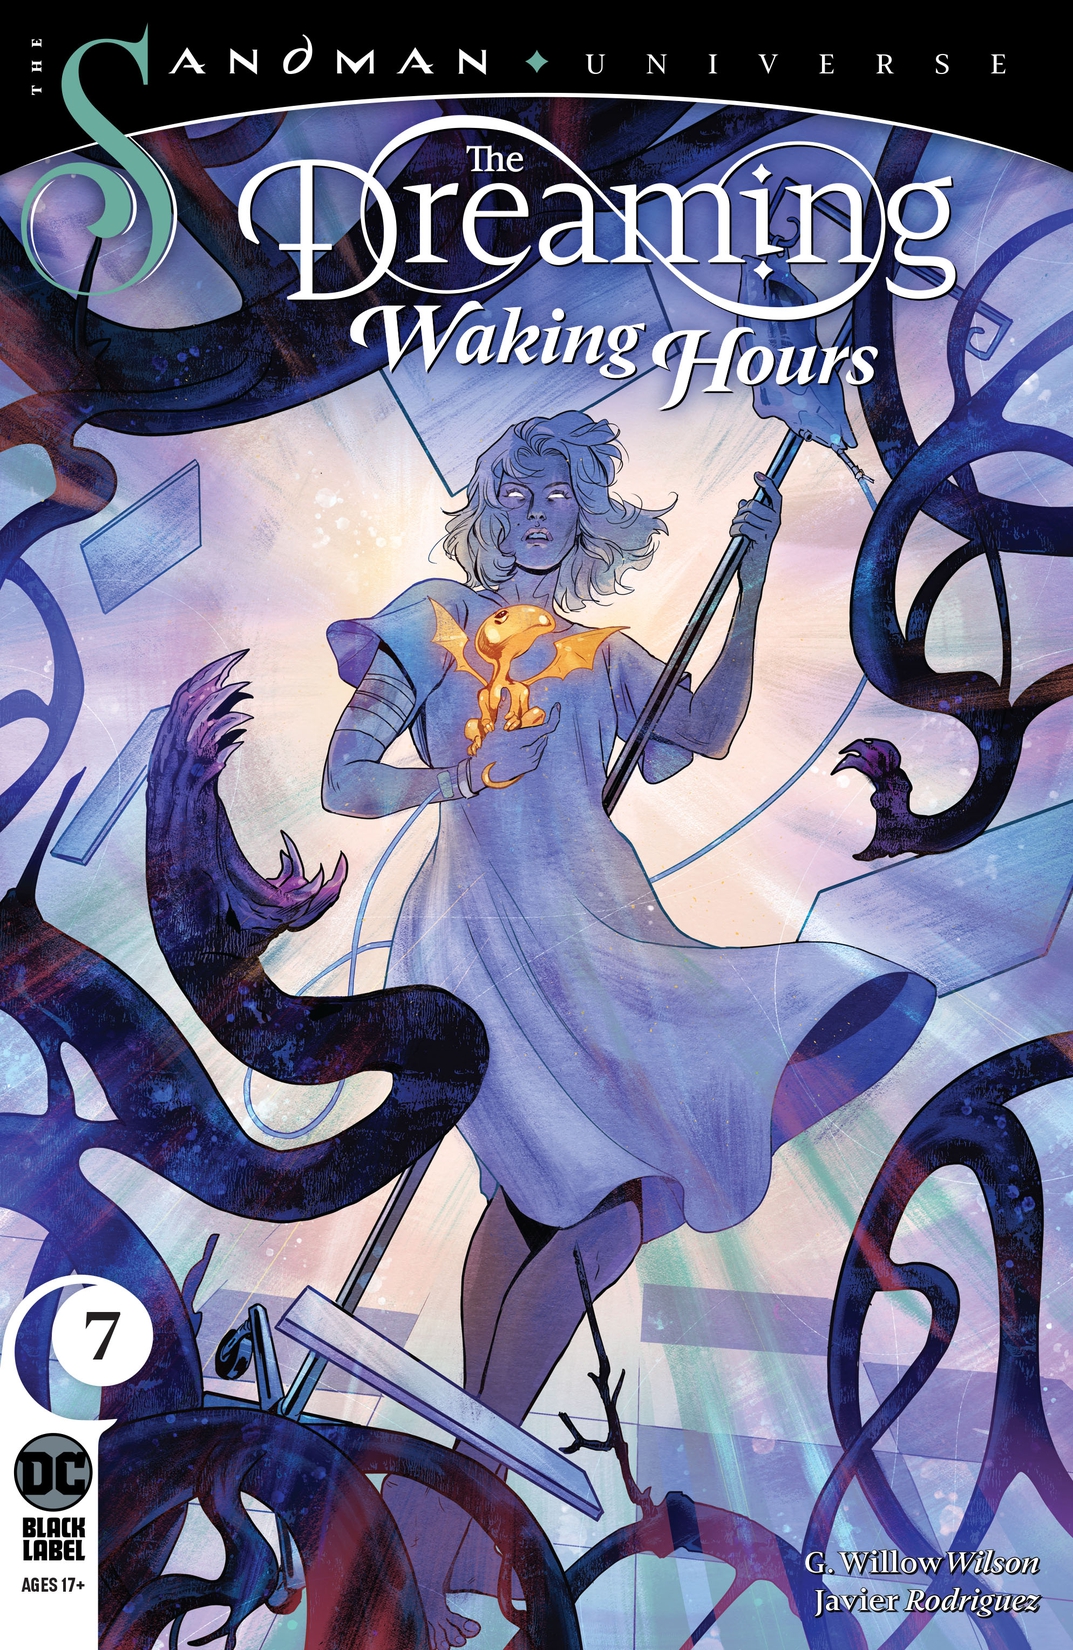 The Dreaming: Waking Hours #7 preview images